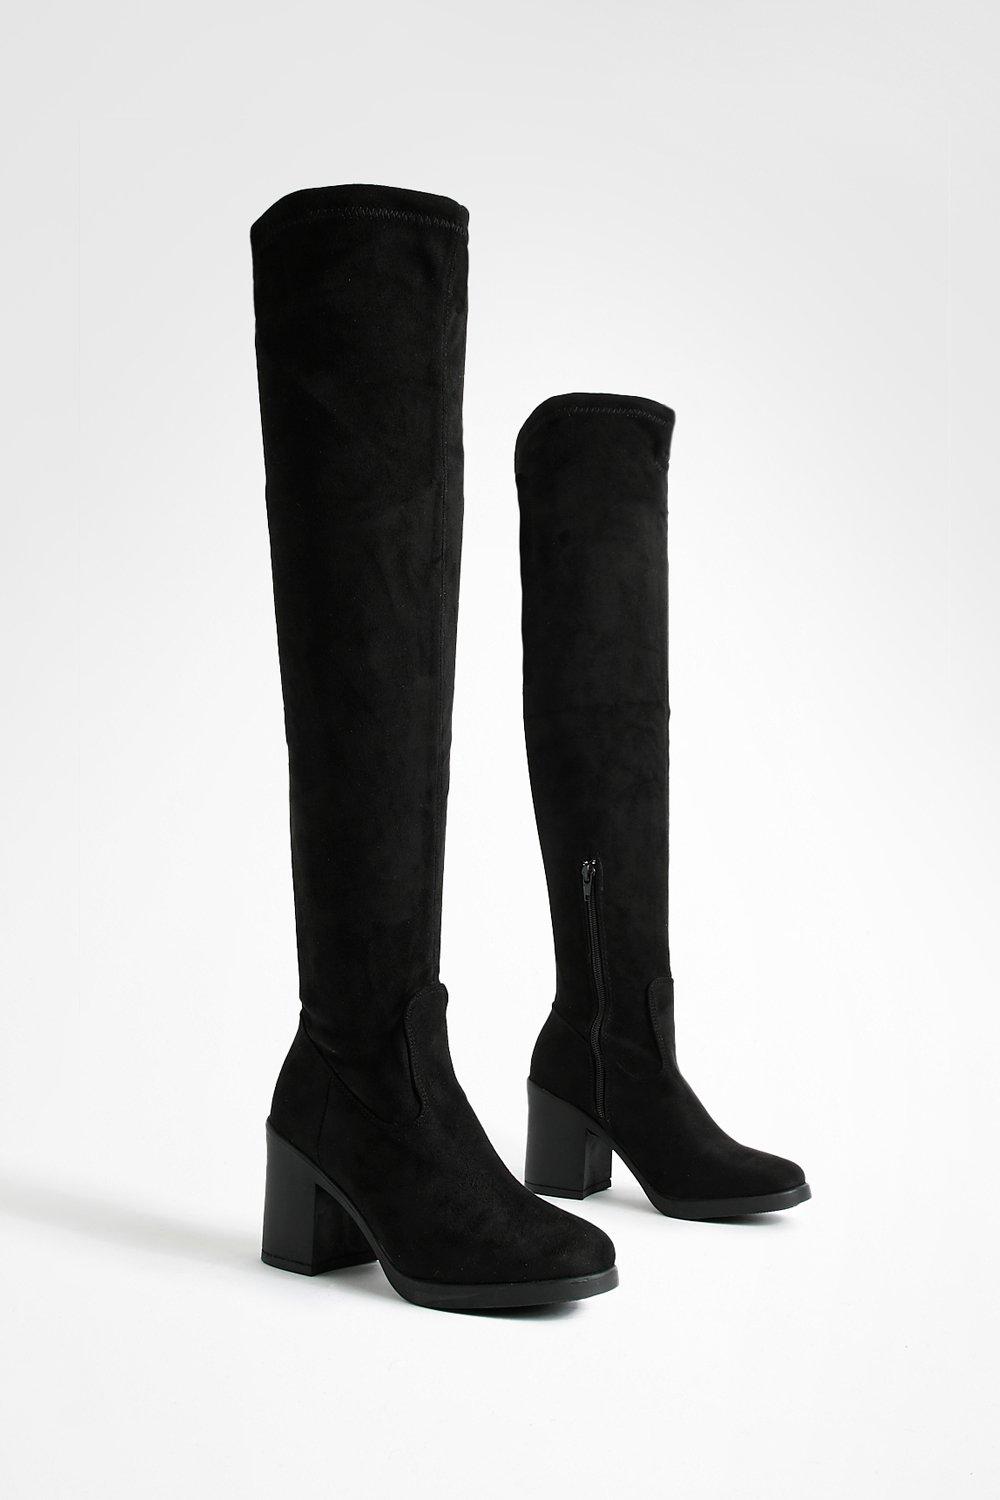 above the knee black boots